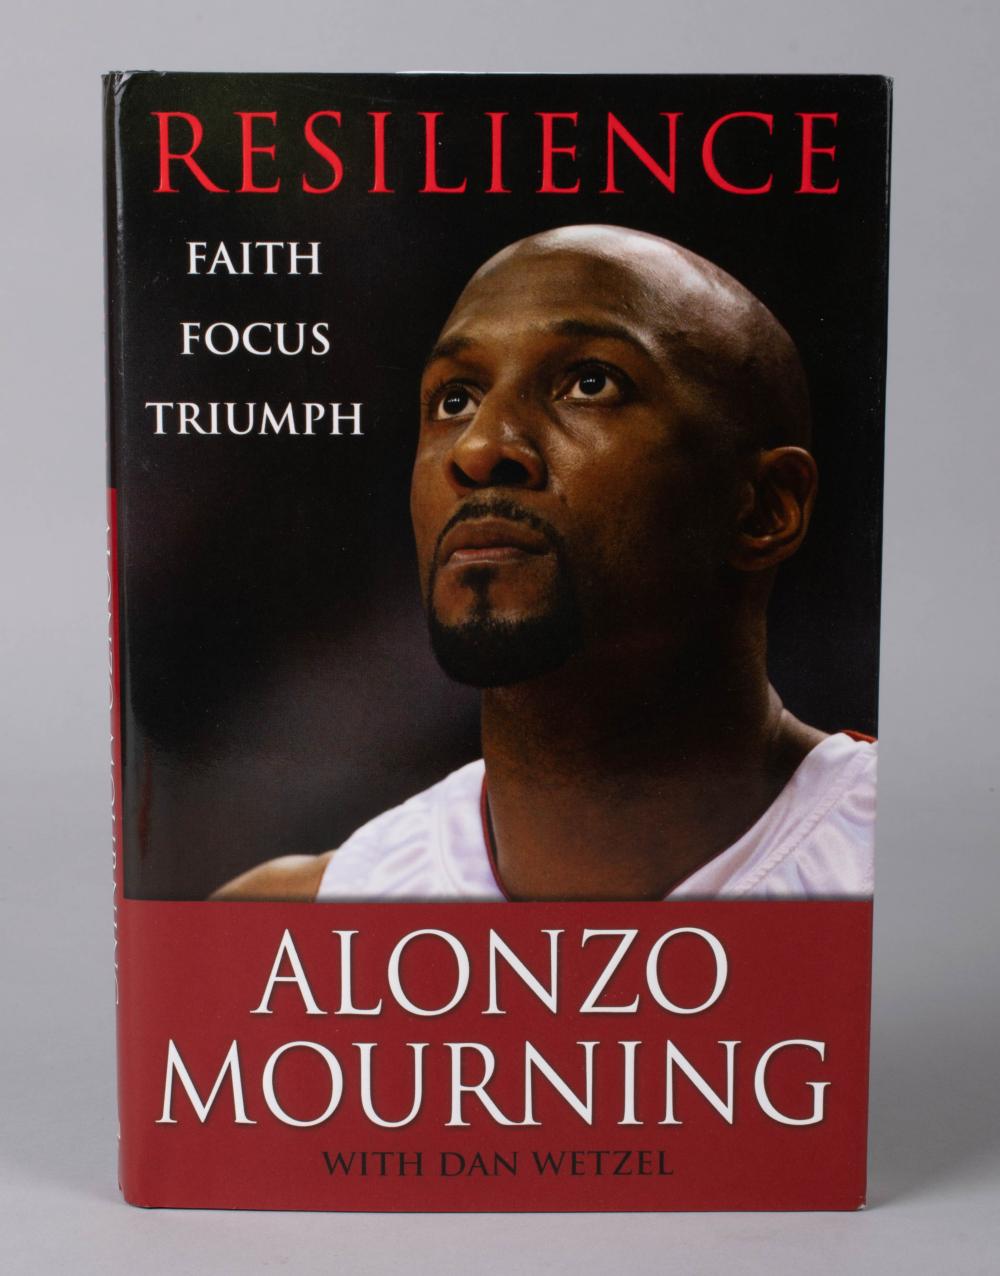 ALONZO MOURNING. RESILIENCE: FAITH